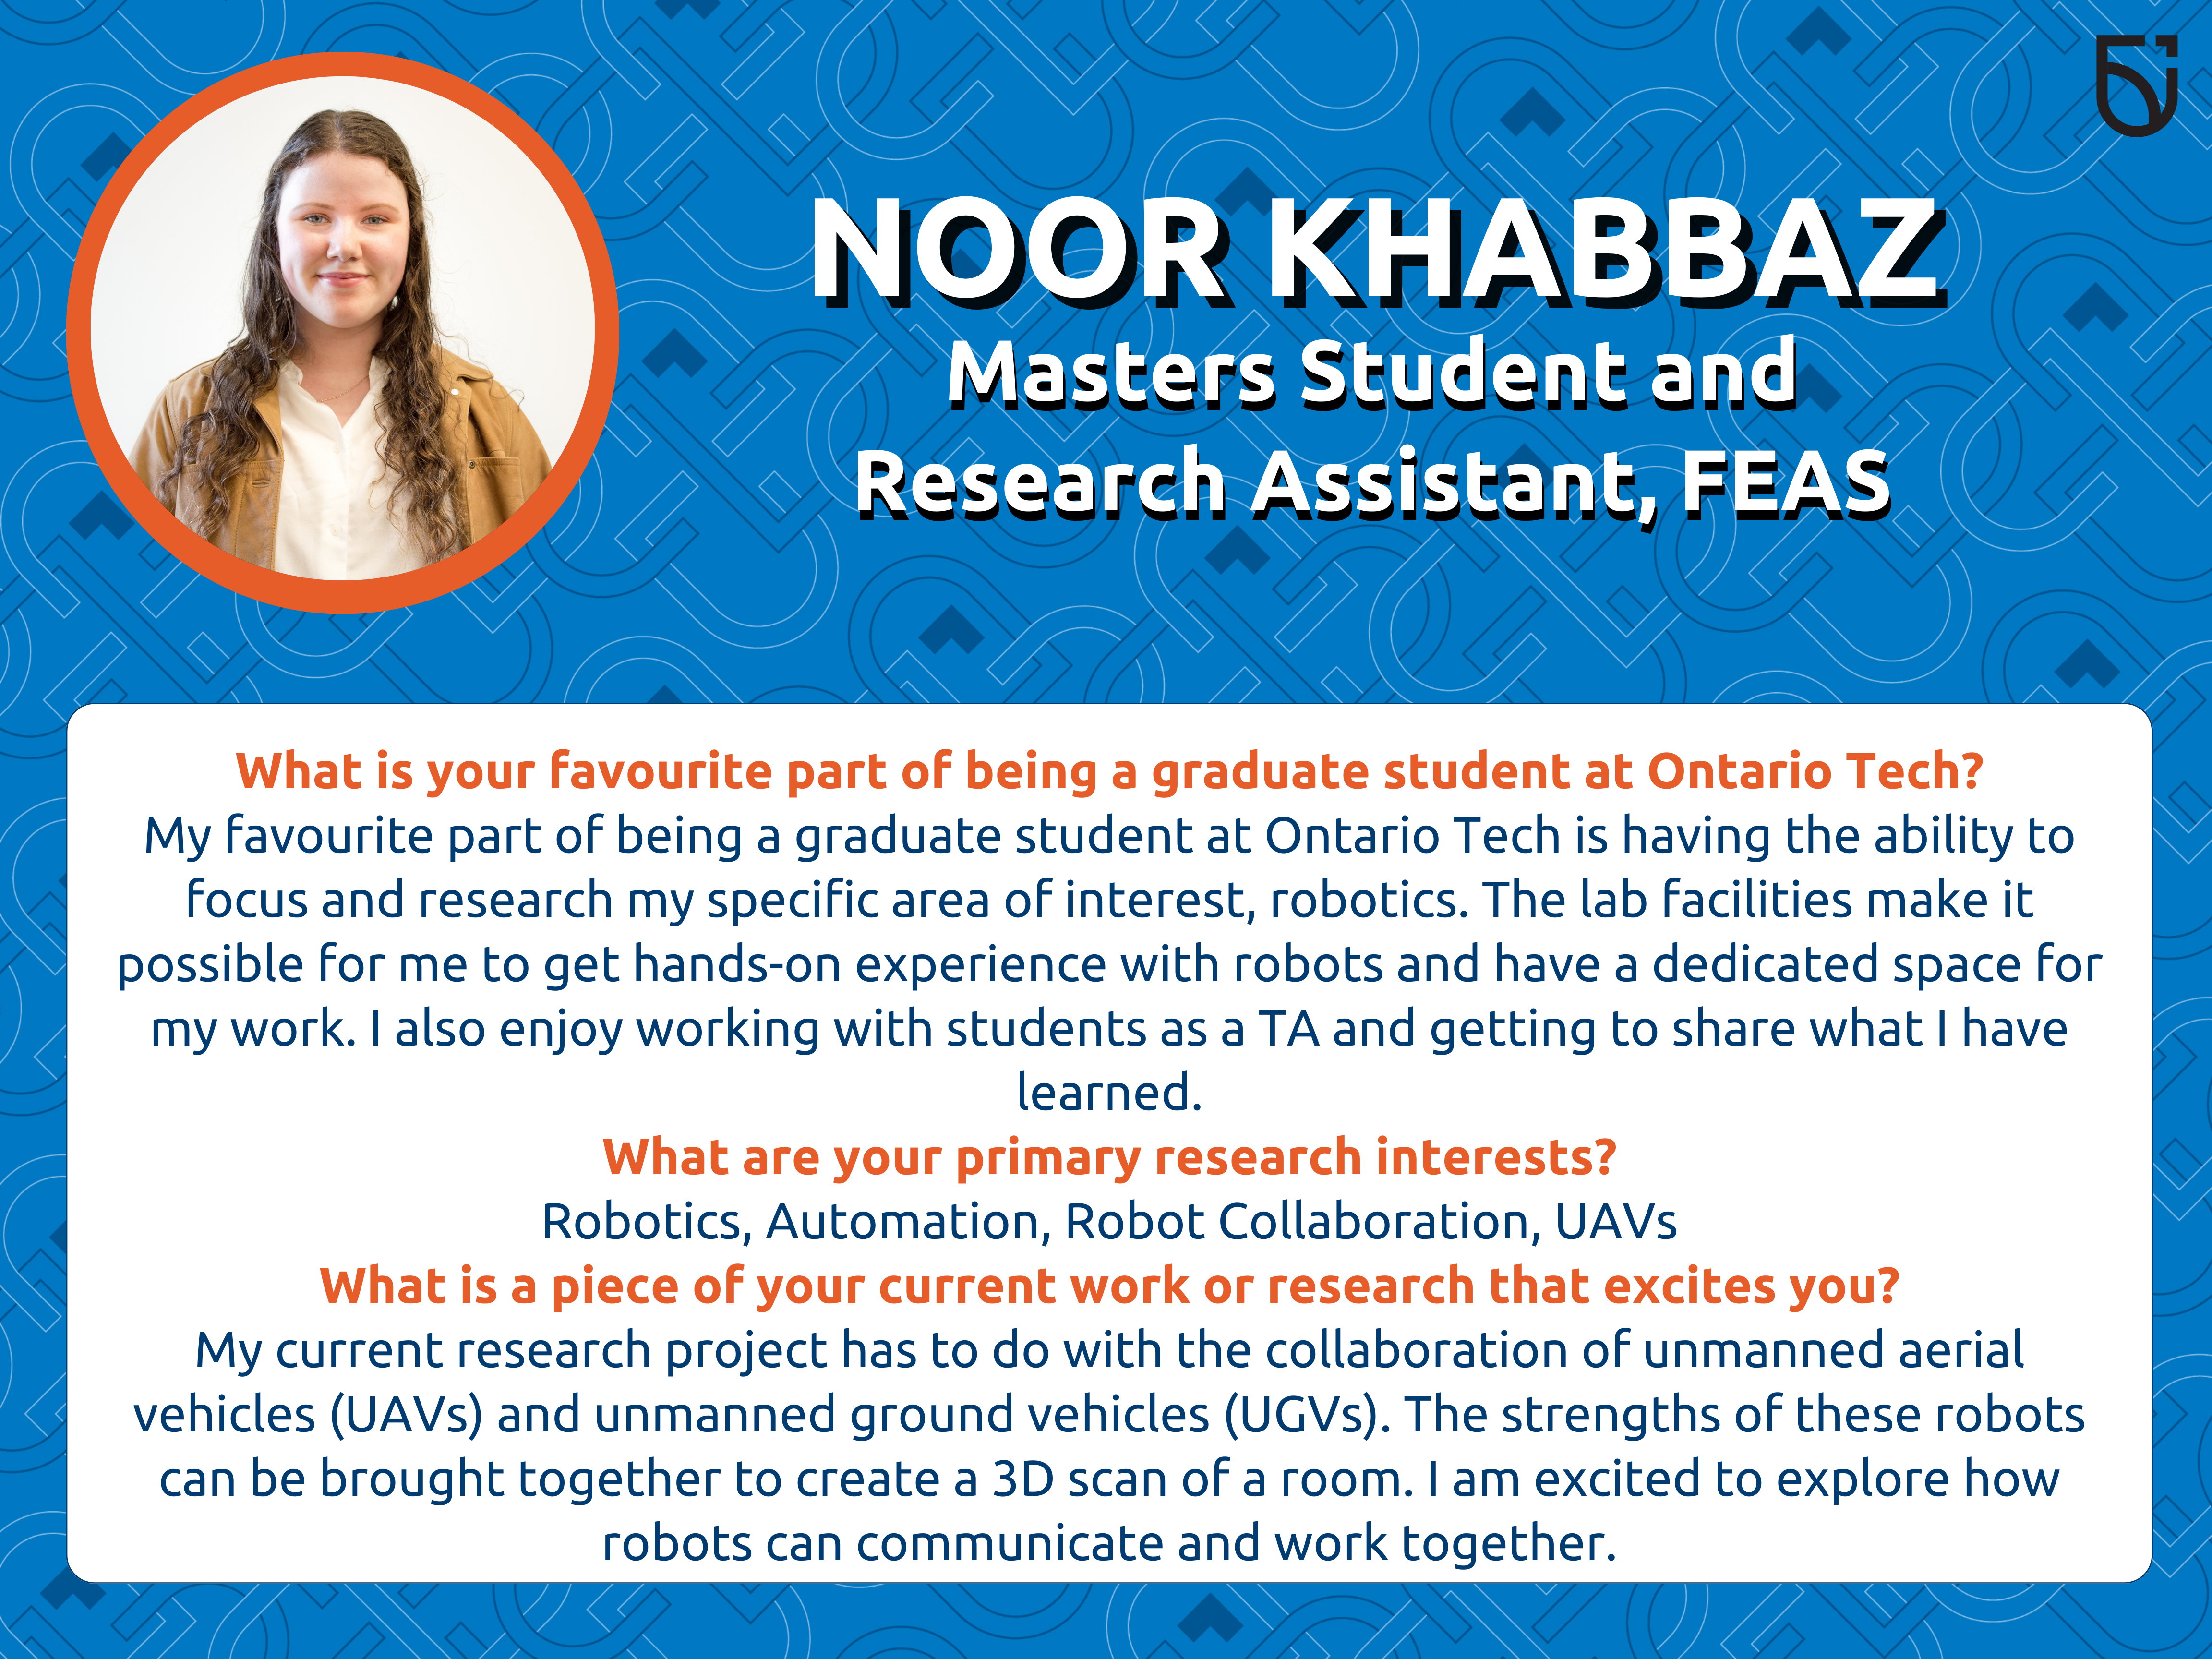 This photo is a Women’s Wednesday feature of Noor Khabbaz, a Masters Student and Research Assistant in the Faculty of Engineering and Applied Science